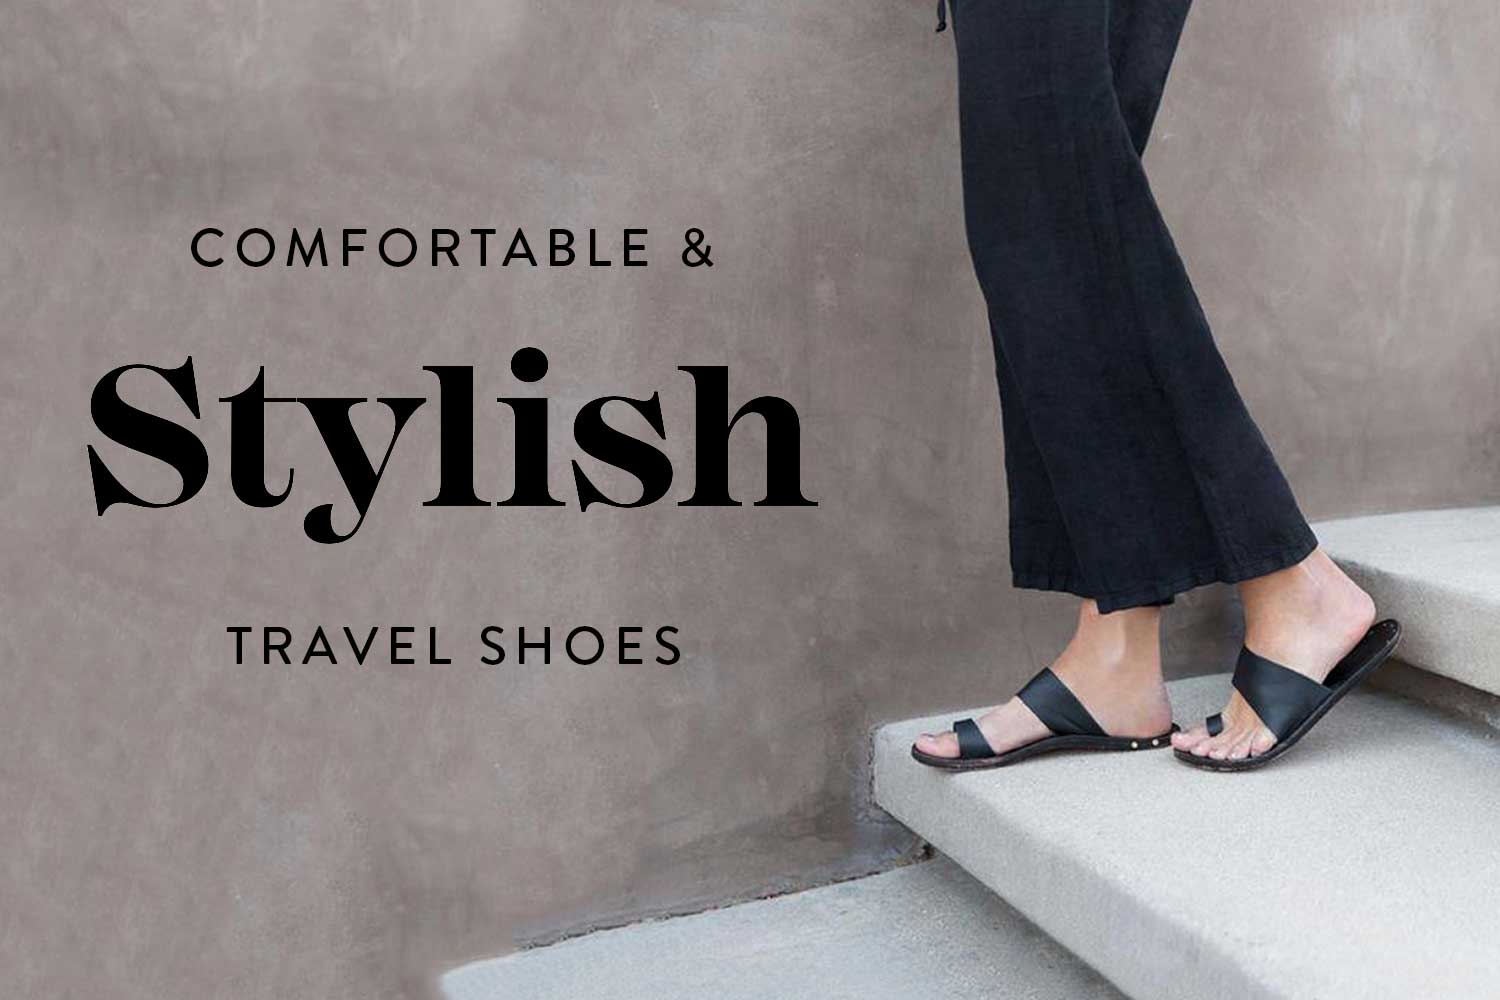 Best Women's Travel Shoes: Ultimate Comfort & Style!